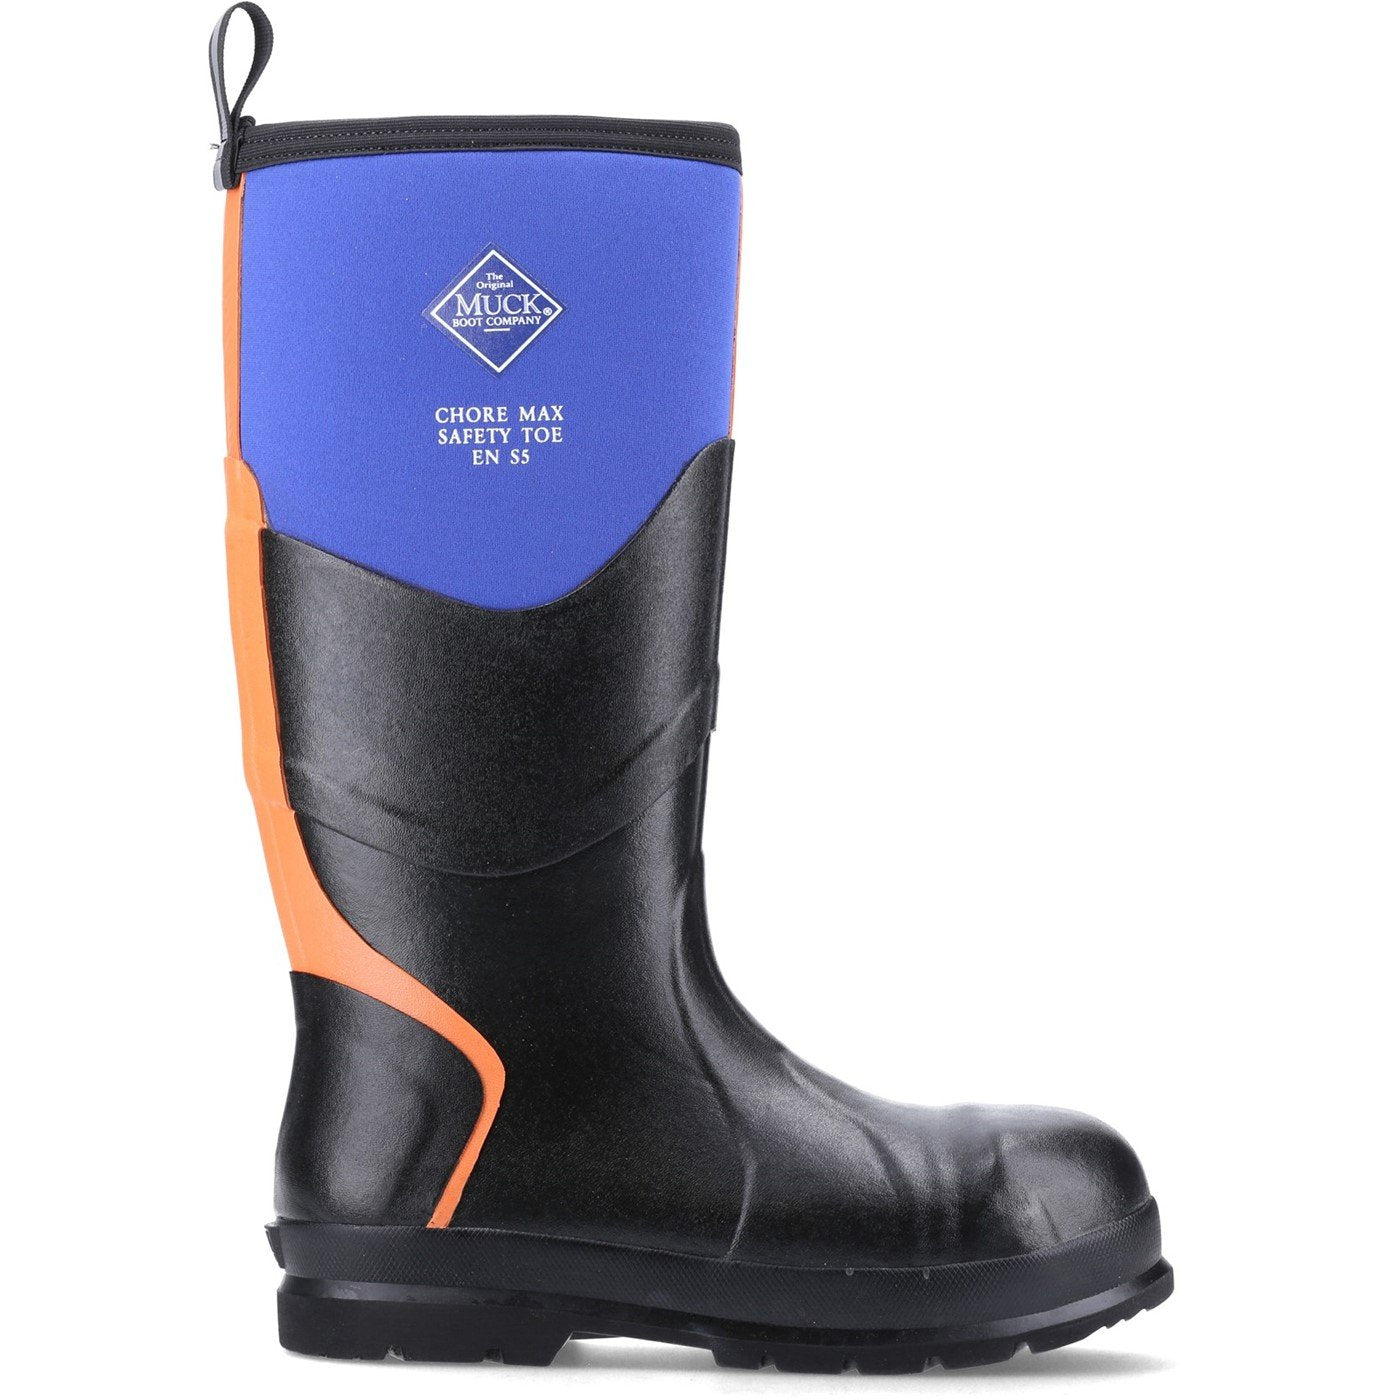 Muck Boots Chore Max S5 Boots